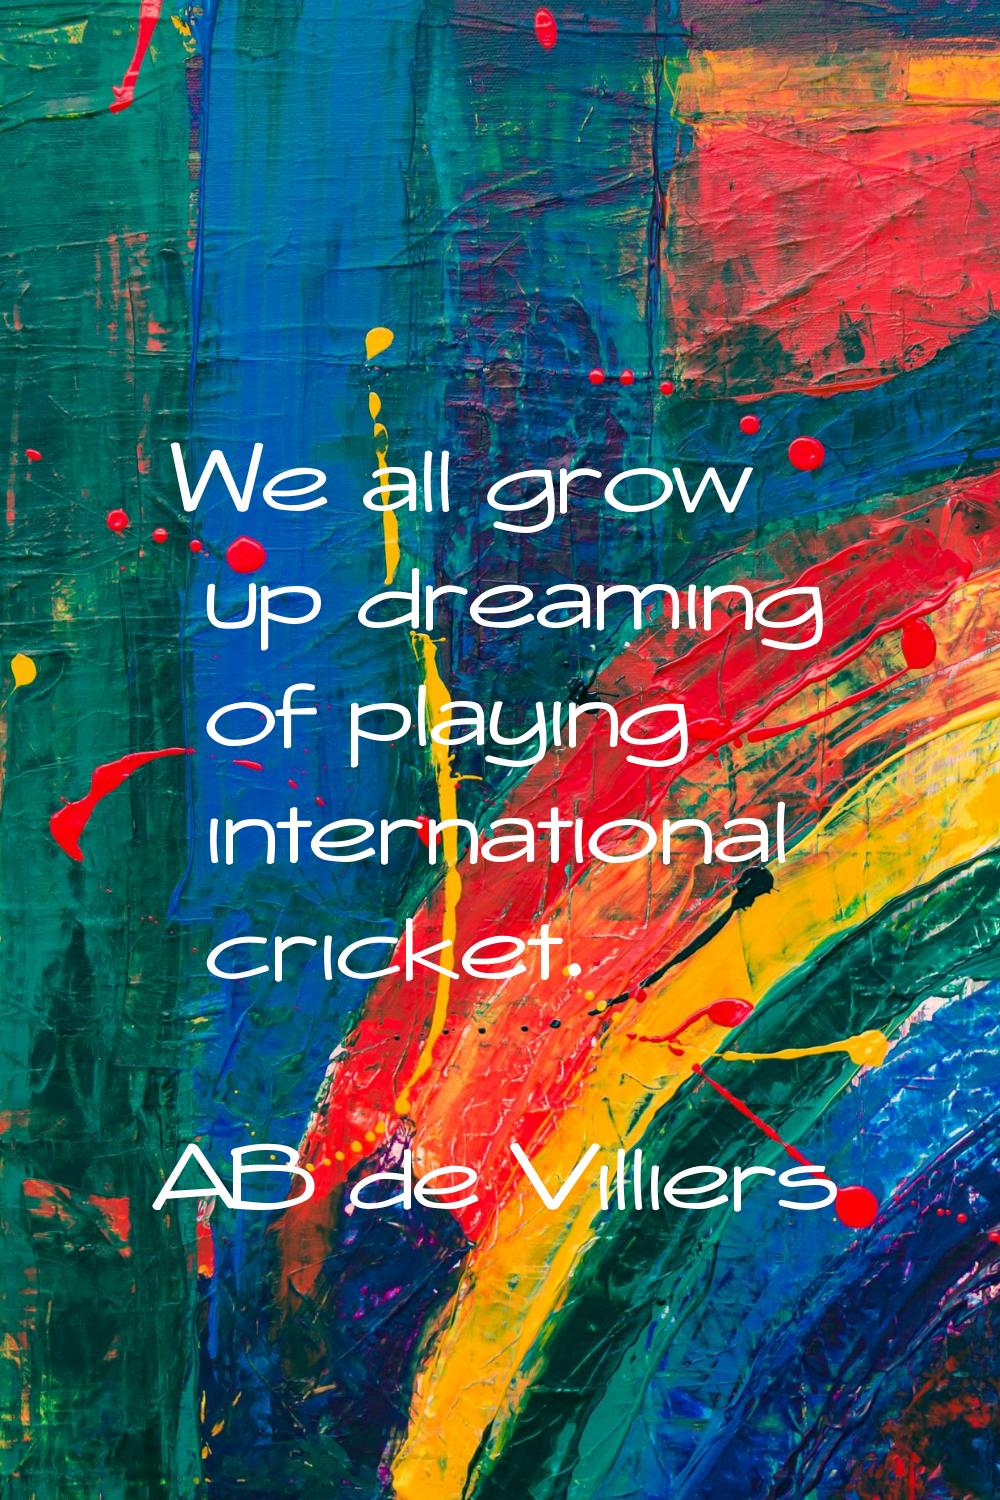 We all grow up dreaming of playing international cricket.